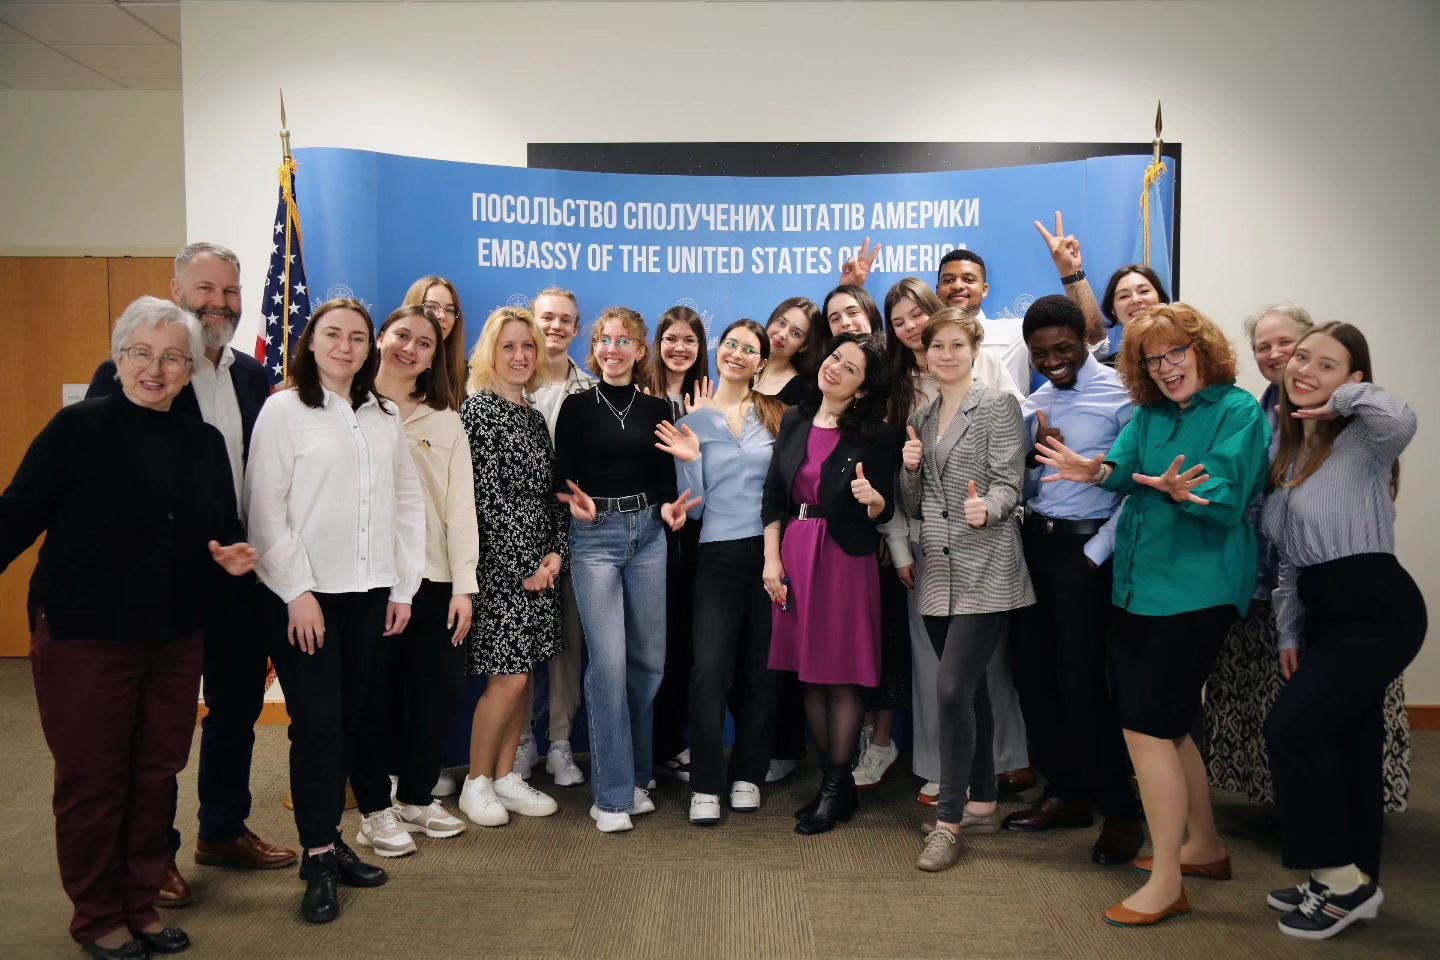 Active, motivated and ready to make changes in their communities 🌟 

Last week AHK had the pleasure to host a two-day visit for the Community Leadership Program participants. Young leaders from Kyiv, Chernihiv, Poltava, Kharkiv, Uzhhorod, Zhytomyr, 